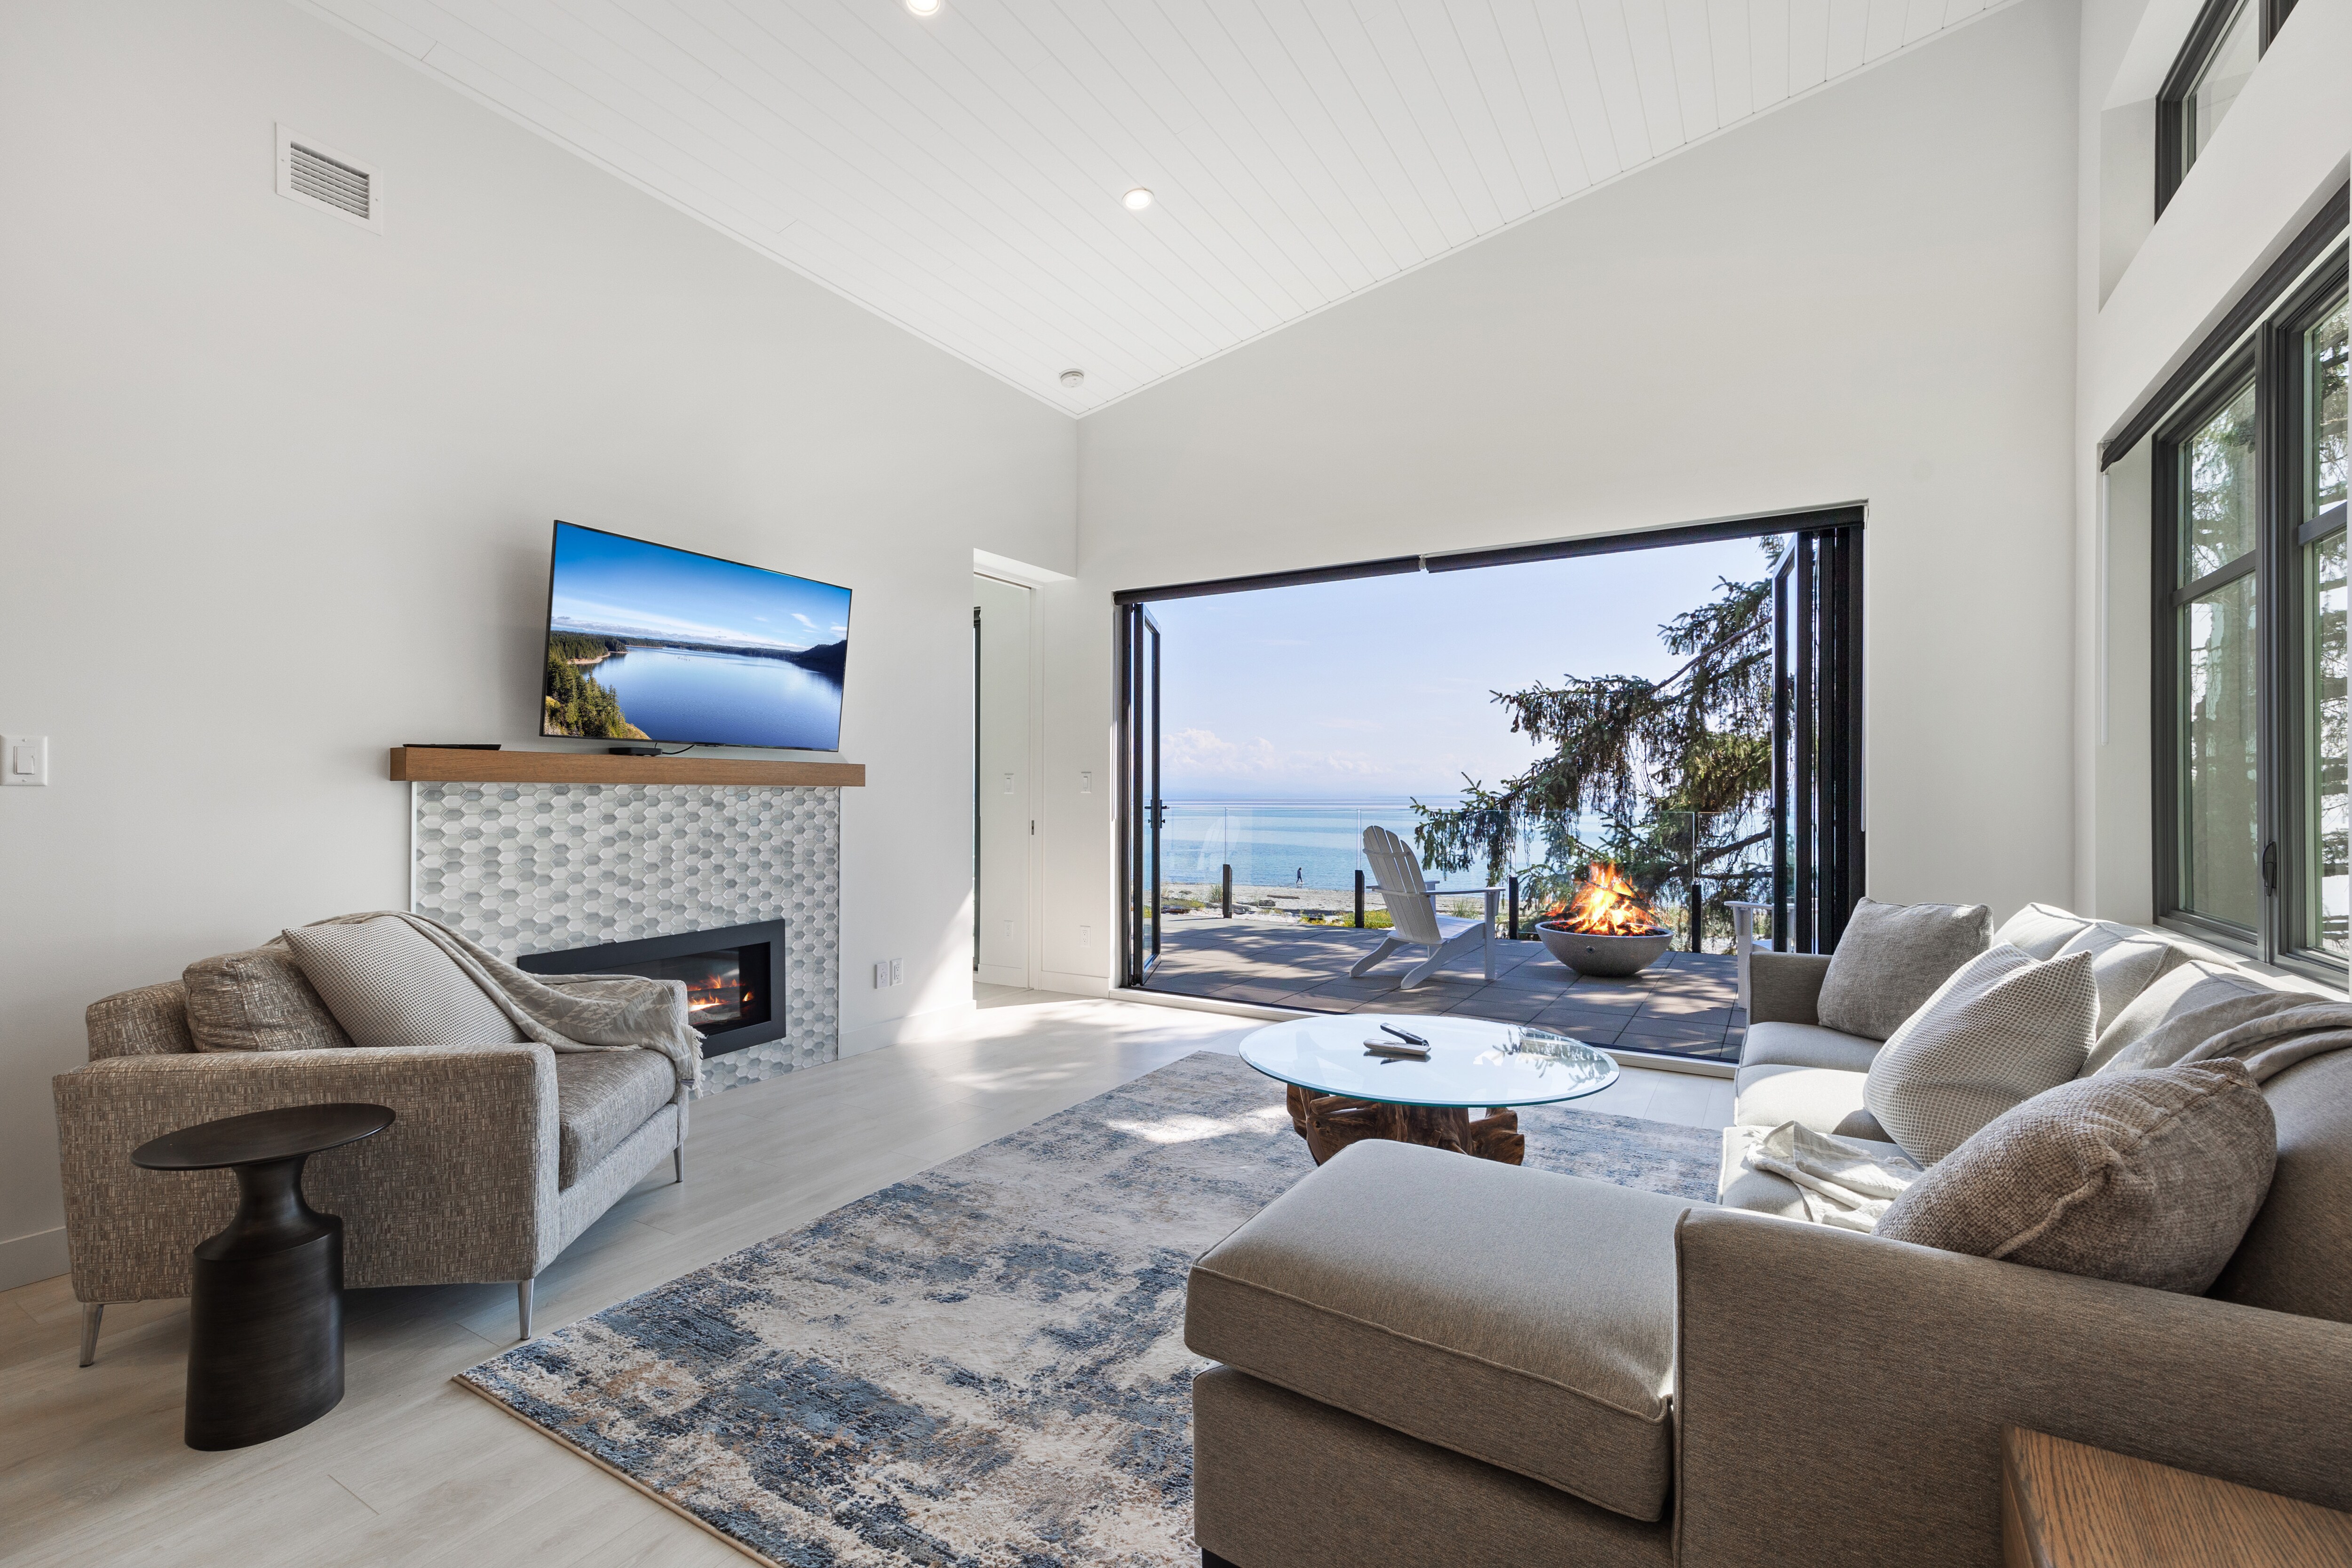 Property Image 1 - The Beach House #21